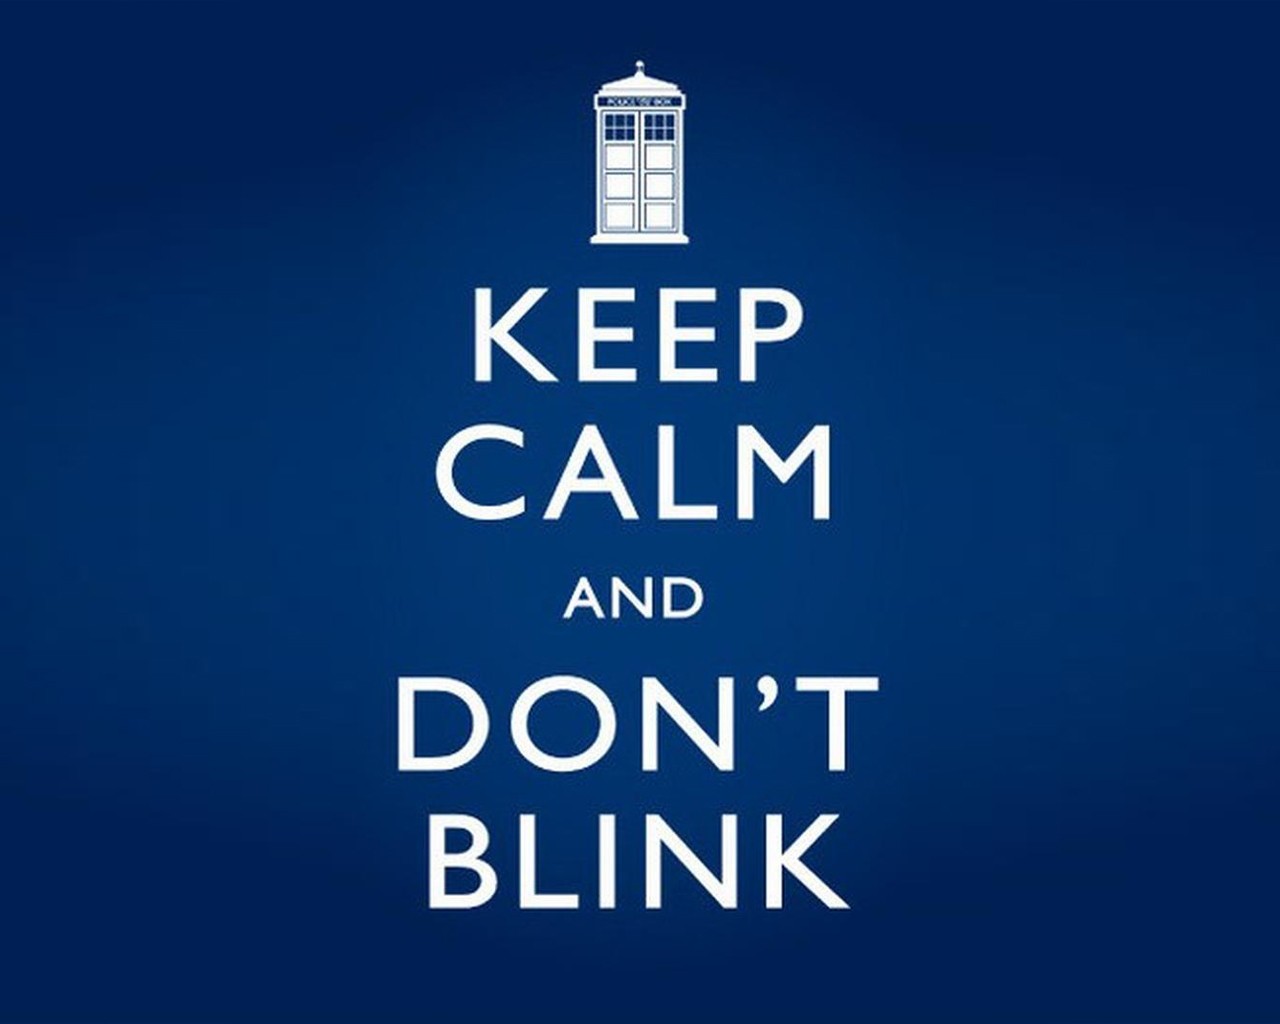 General 1280x1024 simple background Keep Calm and... typography blue background Doctor Who TARDIS TV series science fiction